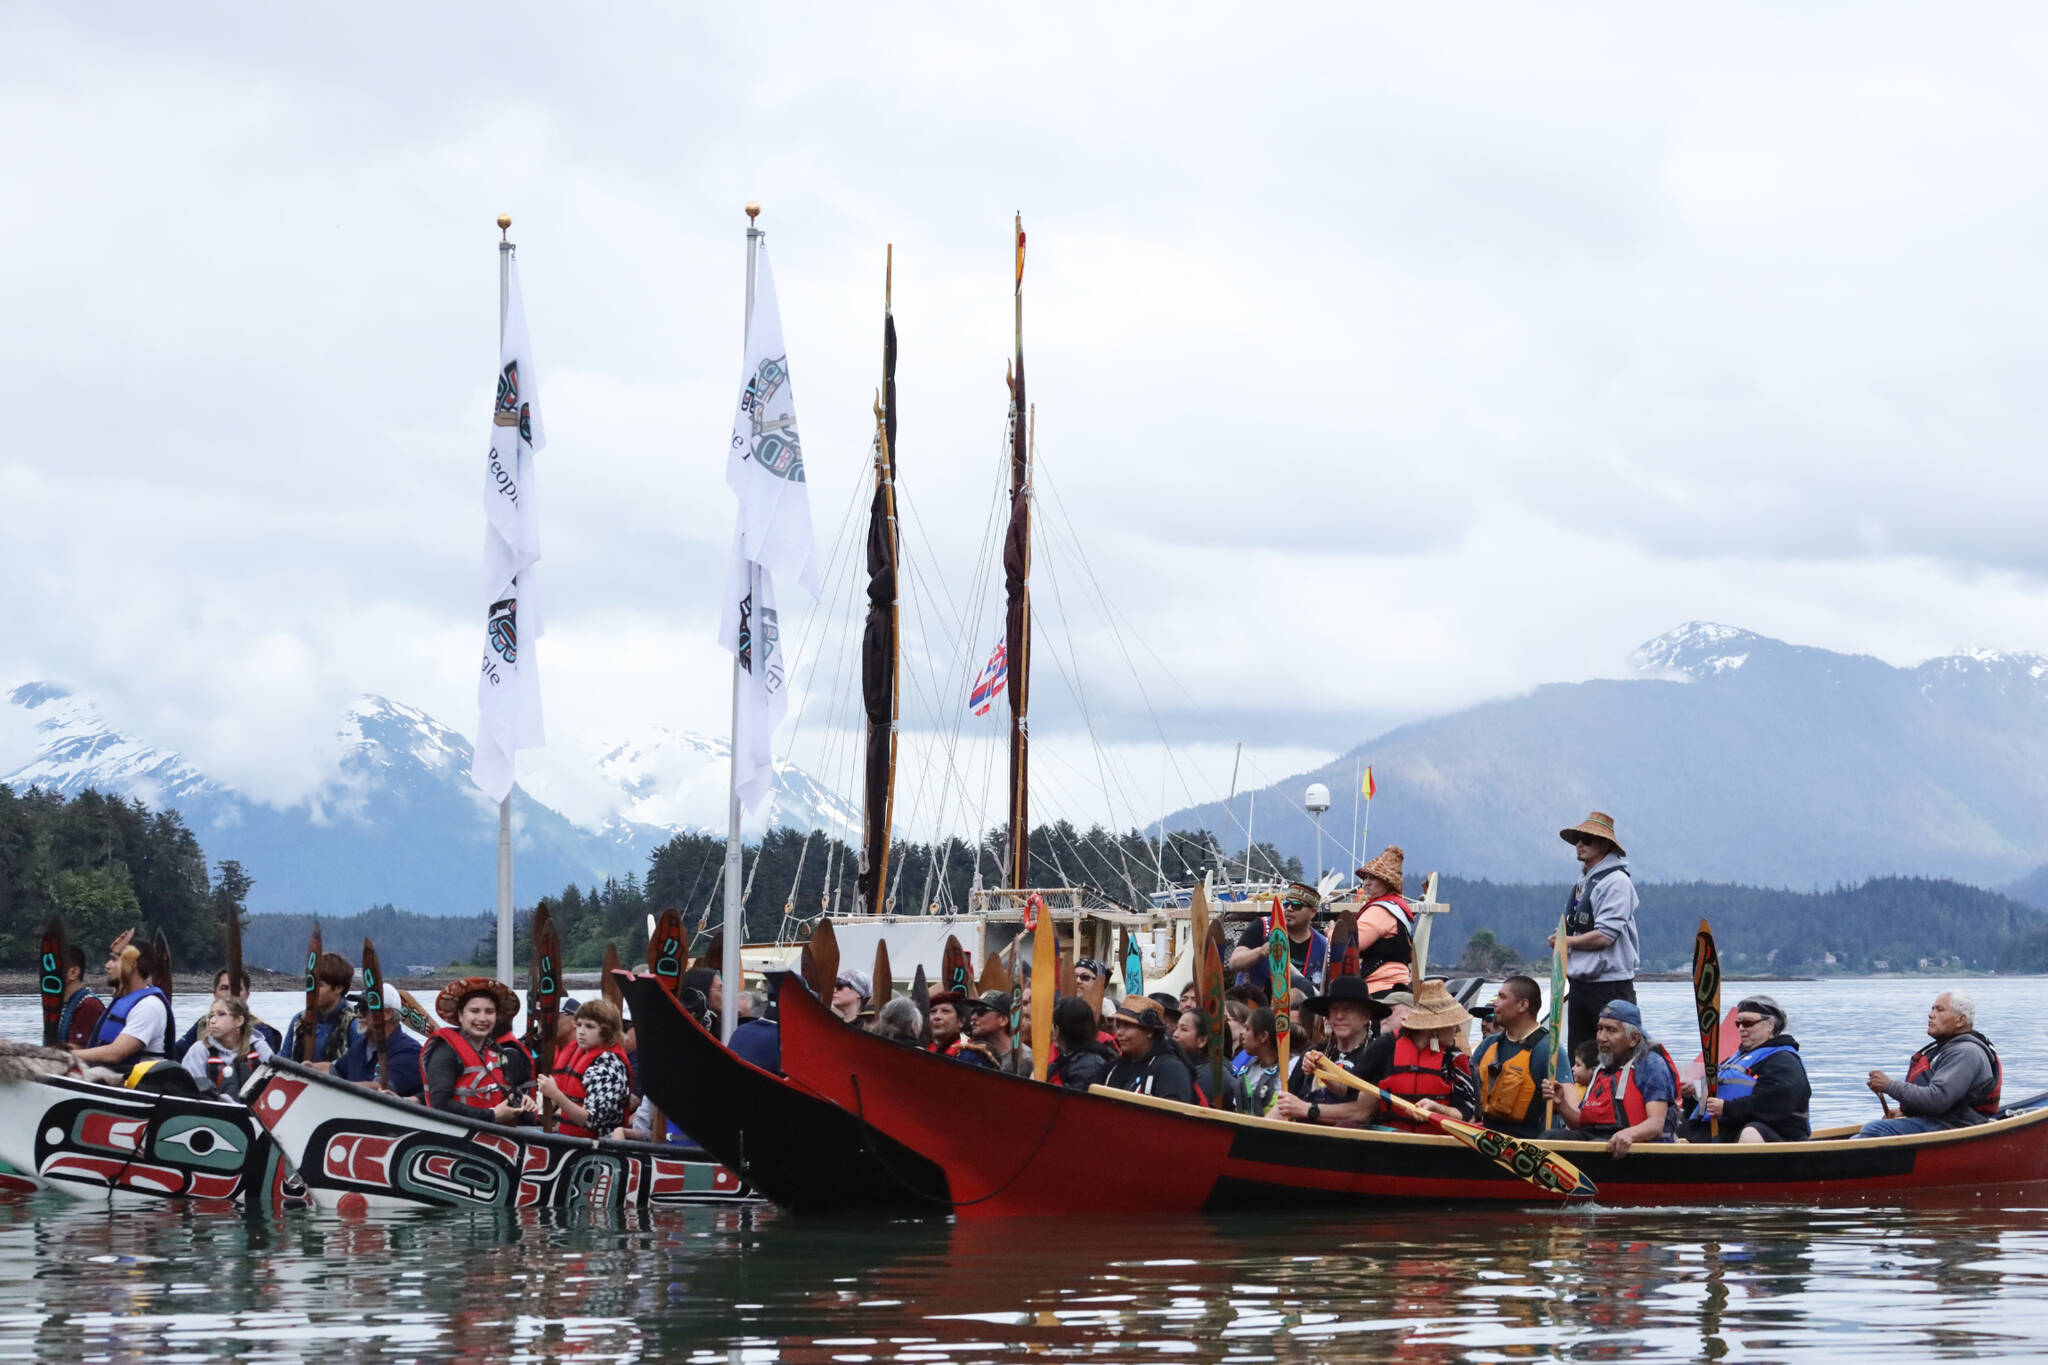 Clarise Larson / Juneau Empire
Crew members of the <strong>Moananuiākea</strong> voyage from the <strong>Hōkūle‘a</strong> canoe paddle to the shore of Auke Bay as they are welcomed Saturday afternoon by Juneau residents and tribal leaders.